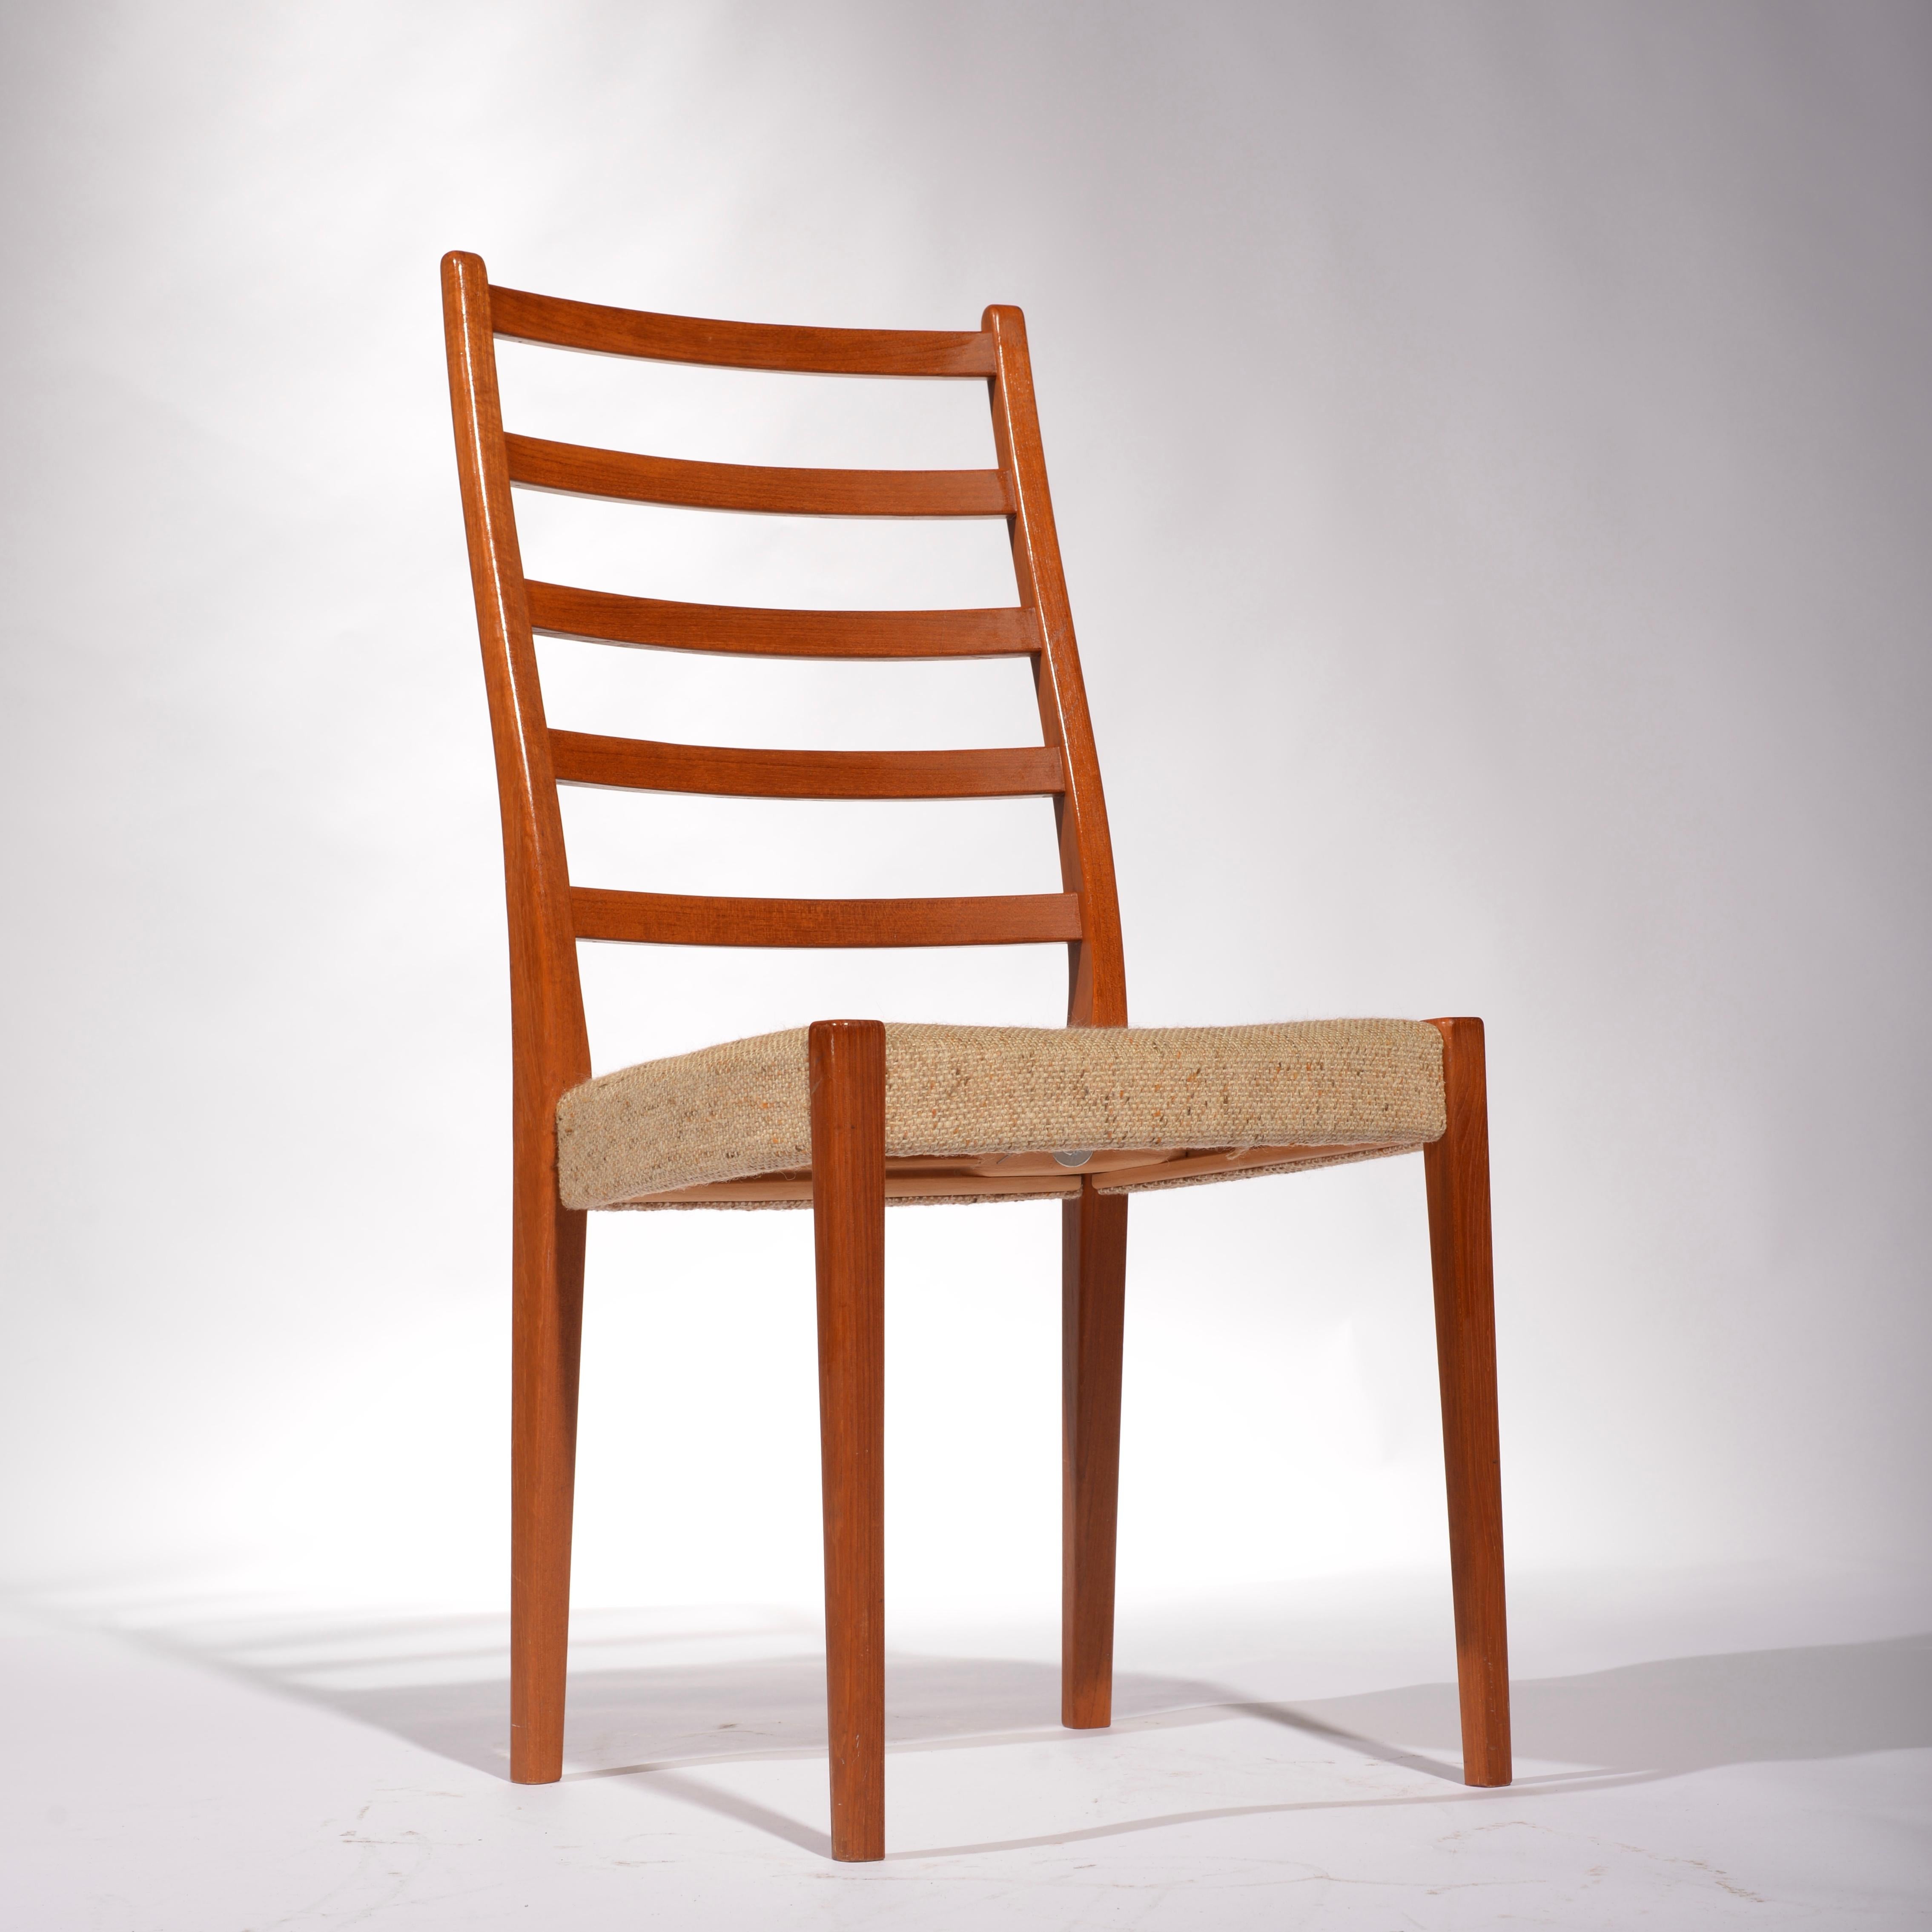 Mid-20th Century 6 Teak Dining Chairs by Svegards Markaryd, Sweden For Sale